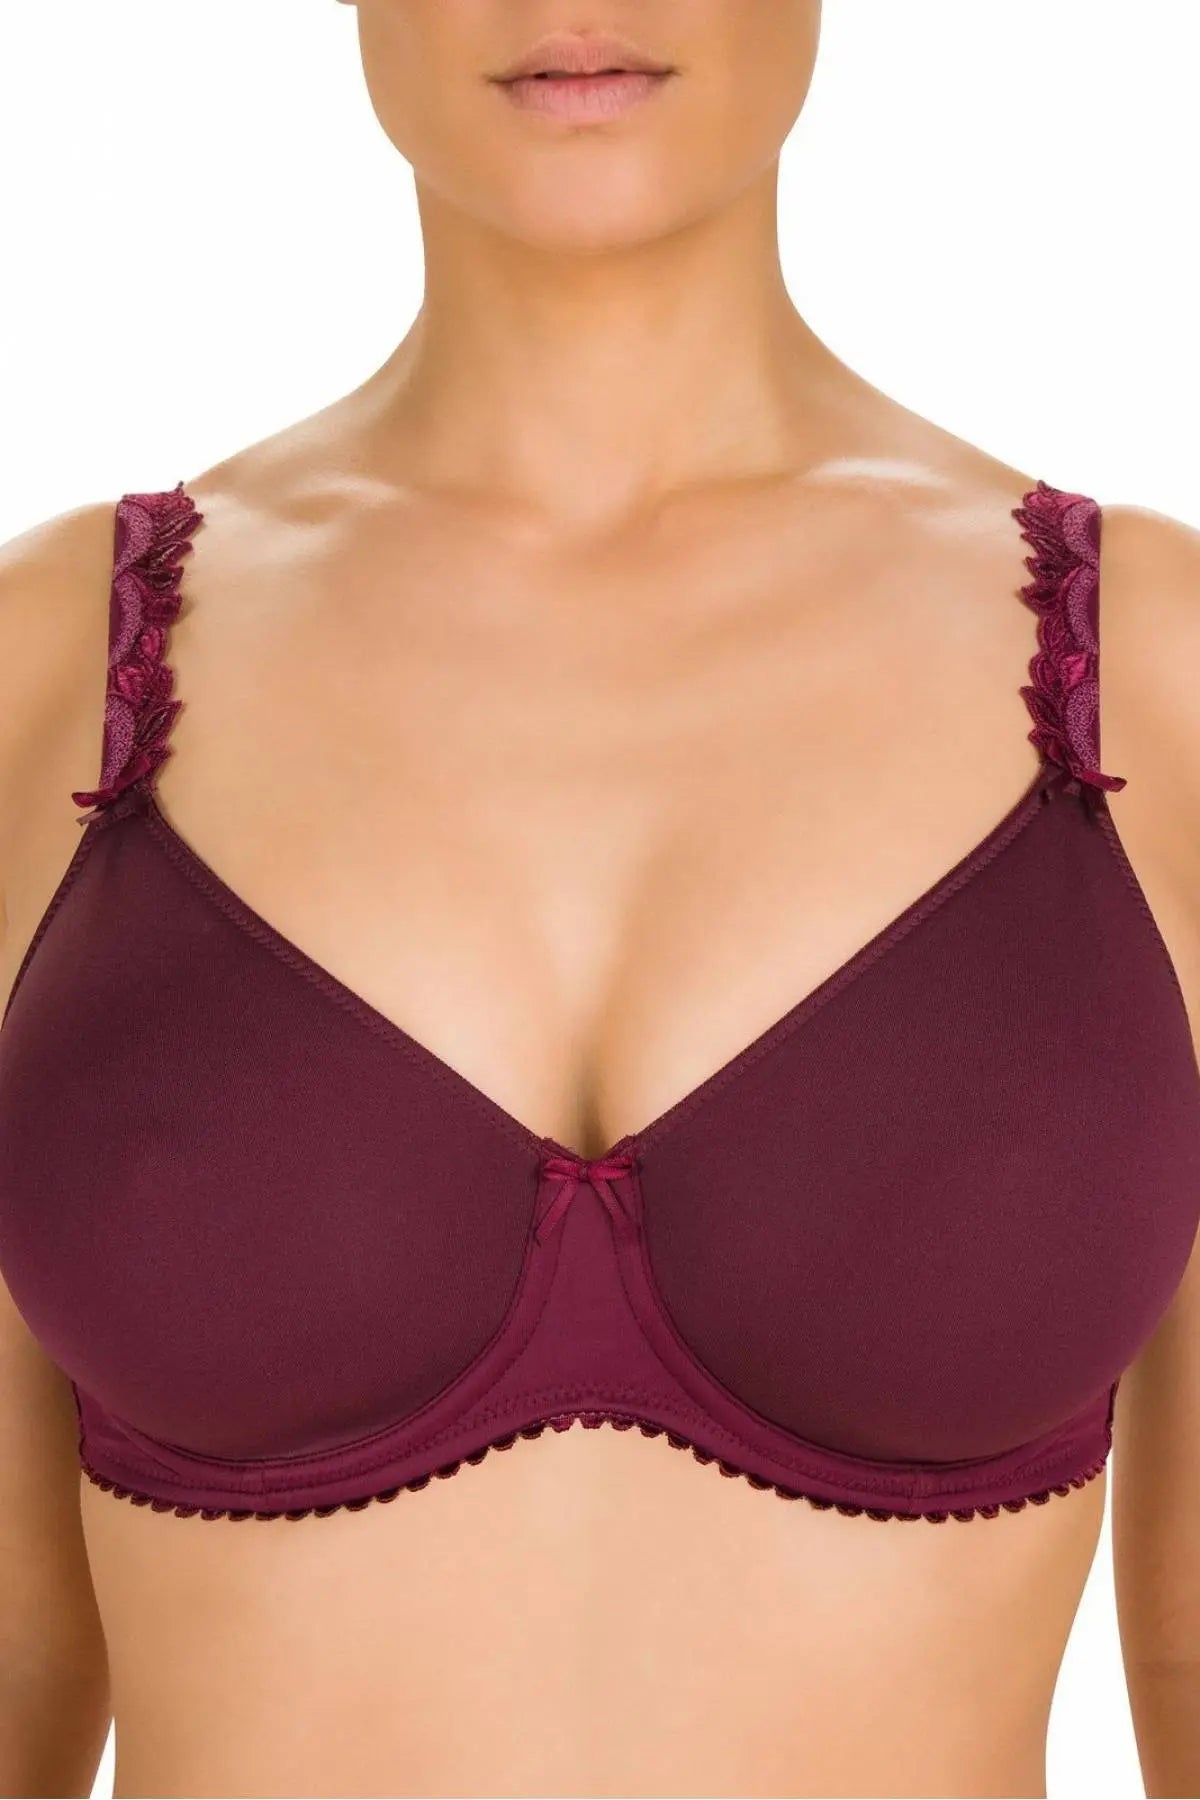 Felina Rhapsody Underwire Bra 531 Light Taupe buy for the best price CAD$  142.00 - Canada and U.S. delivery – Bralissimo